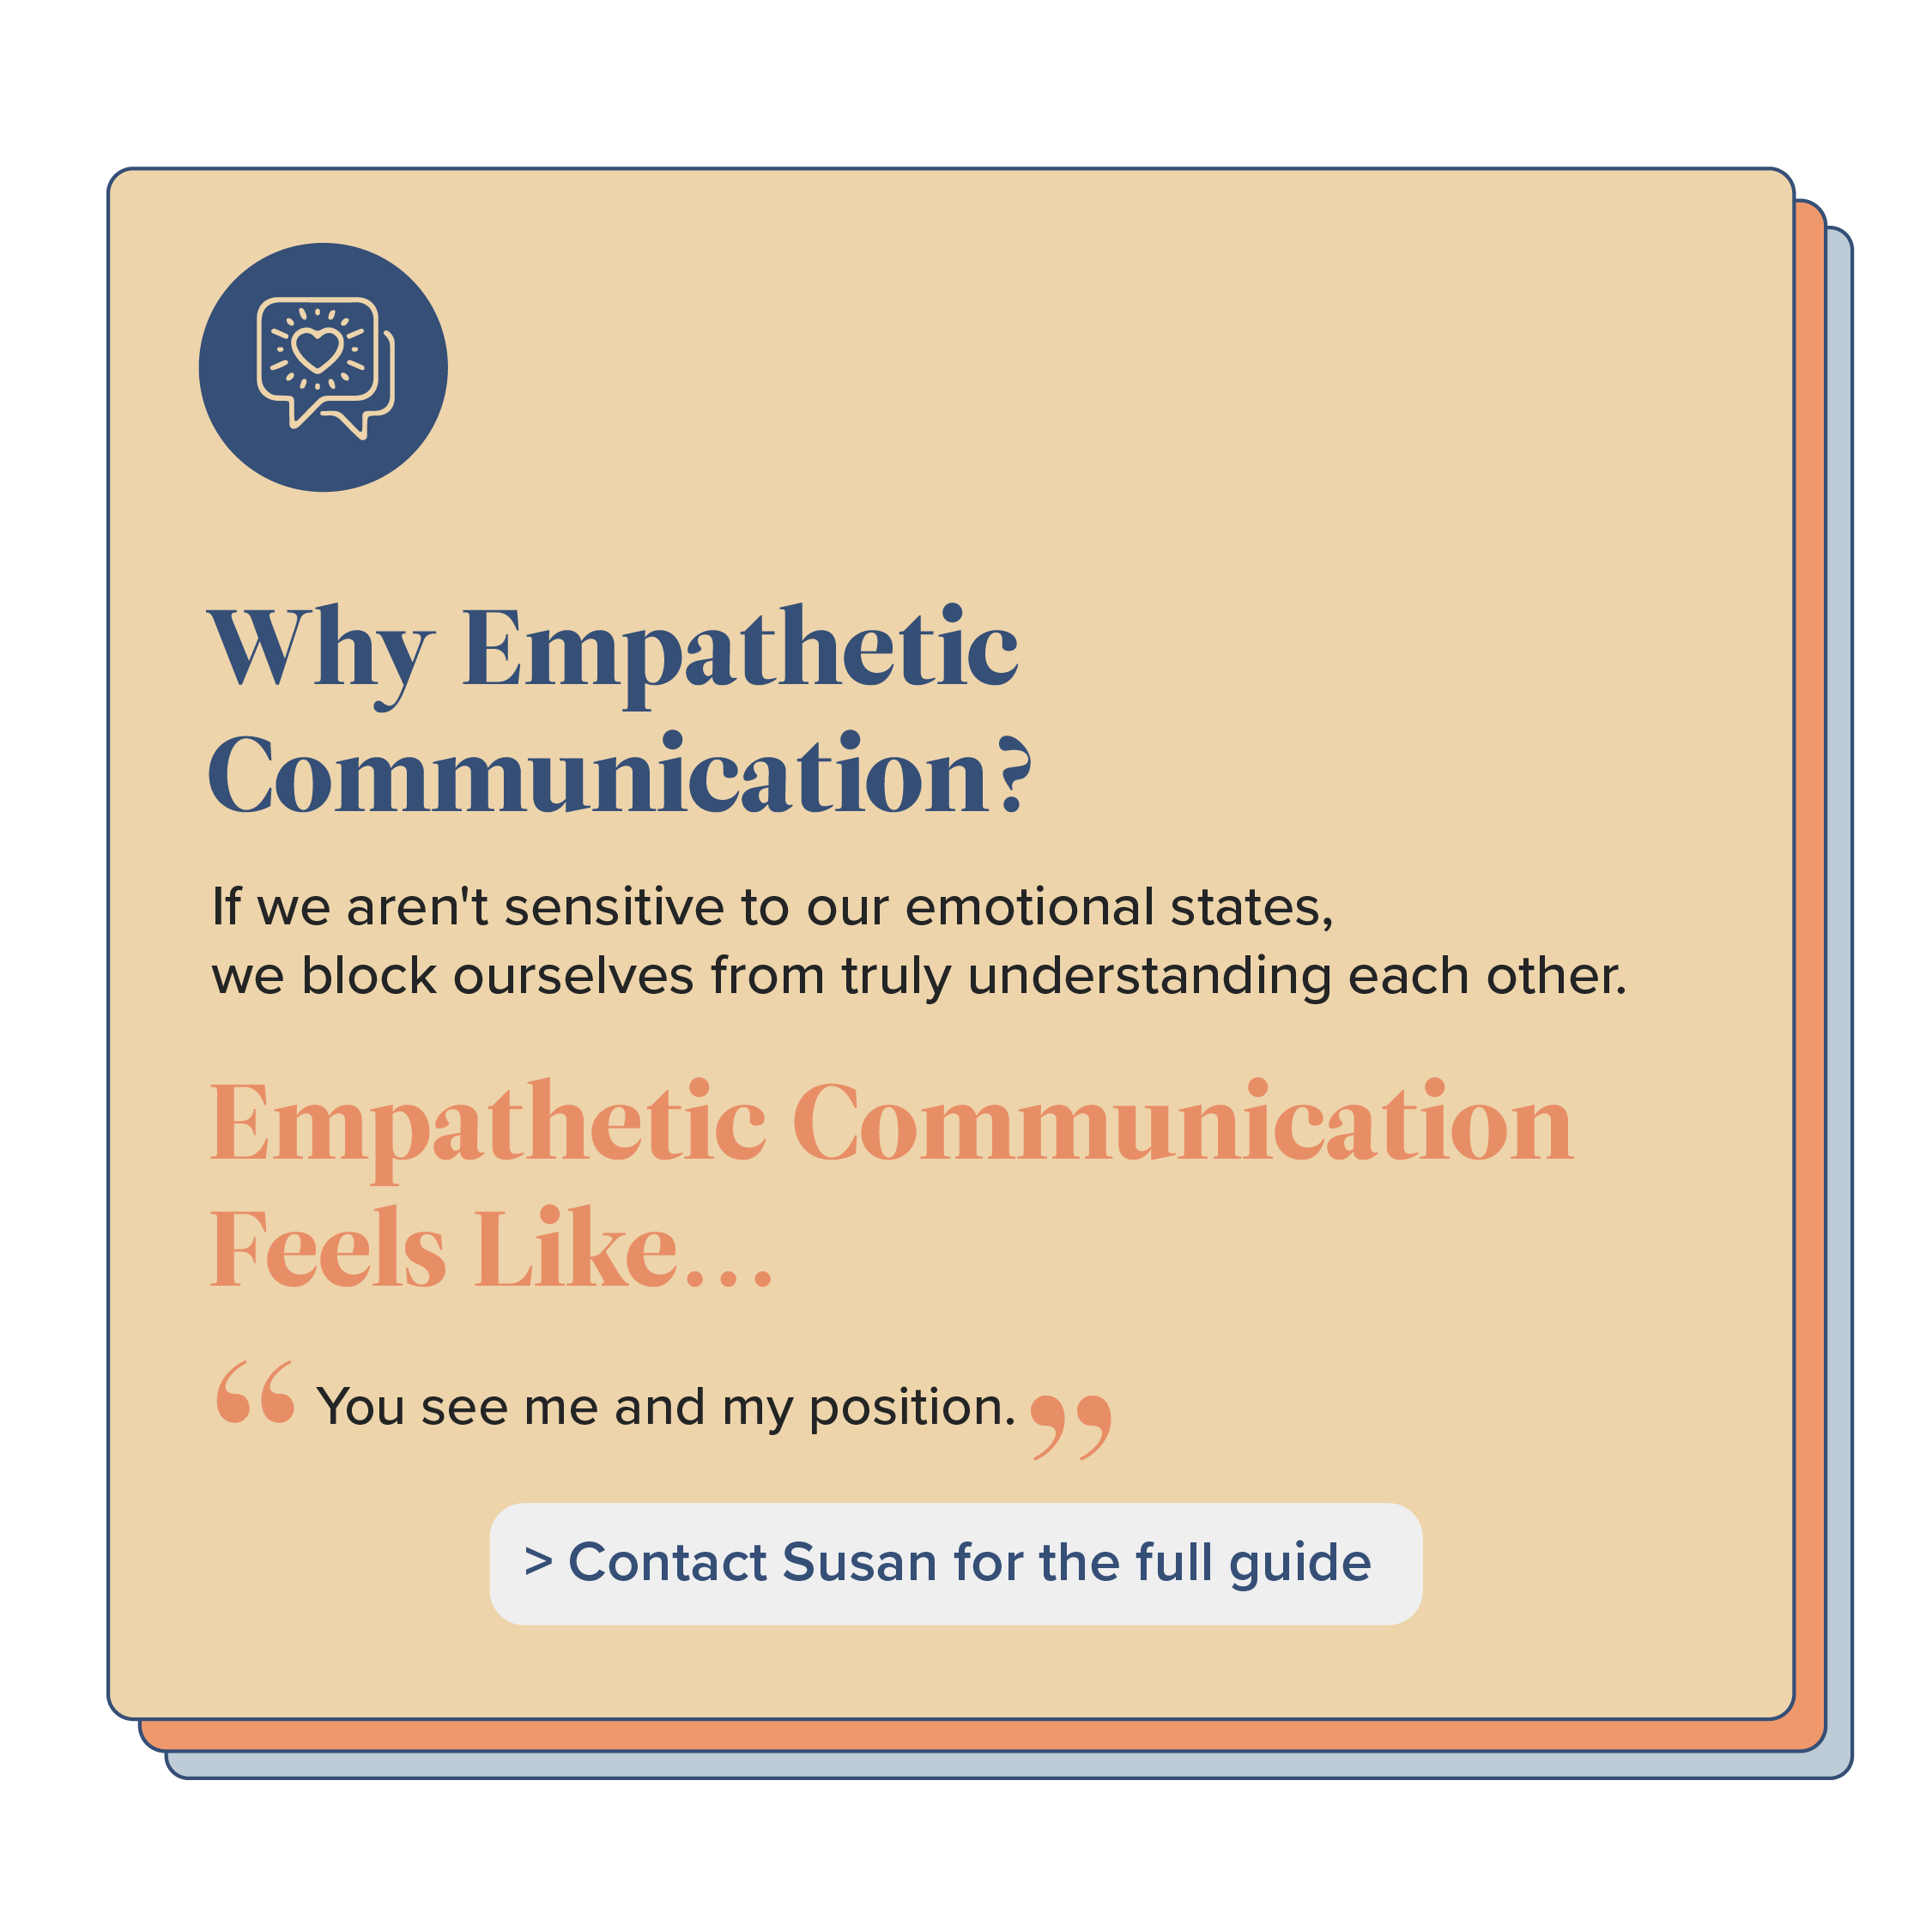 Communication Empathetic communication requires you to be sensitive to your emotional state. If you aren’t noticing what’s happening, you block yourself from truly understanding and being understood